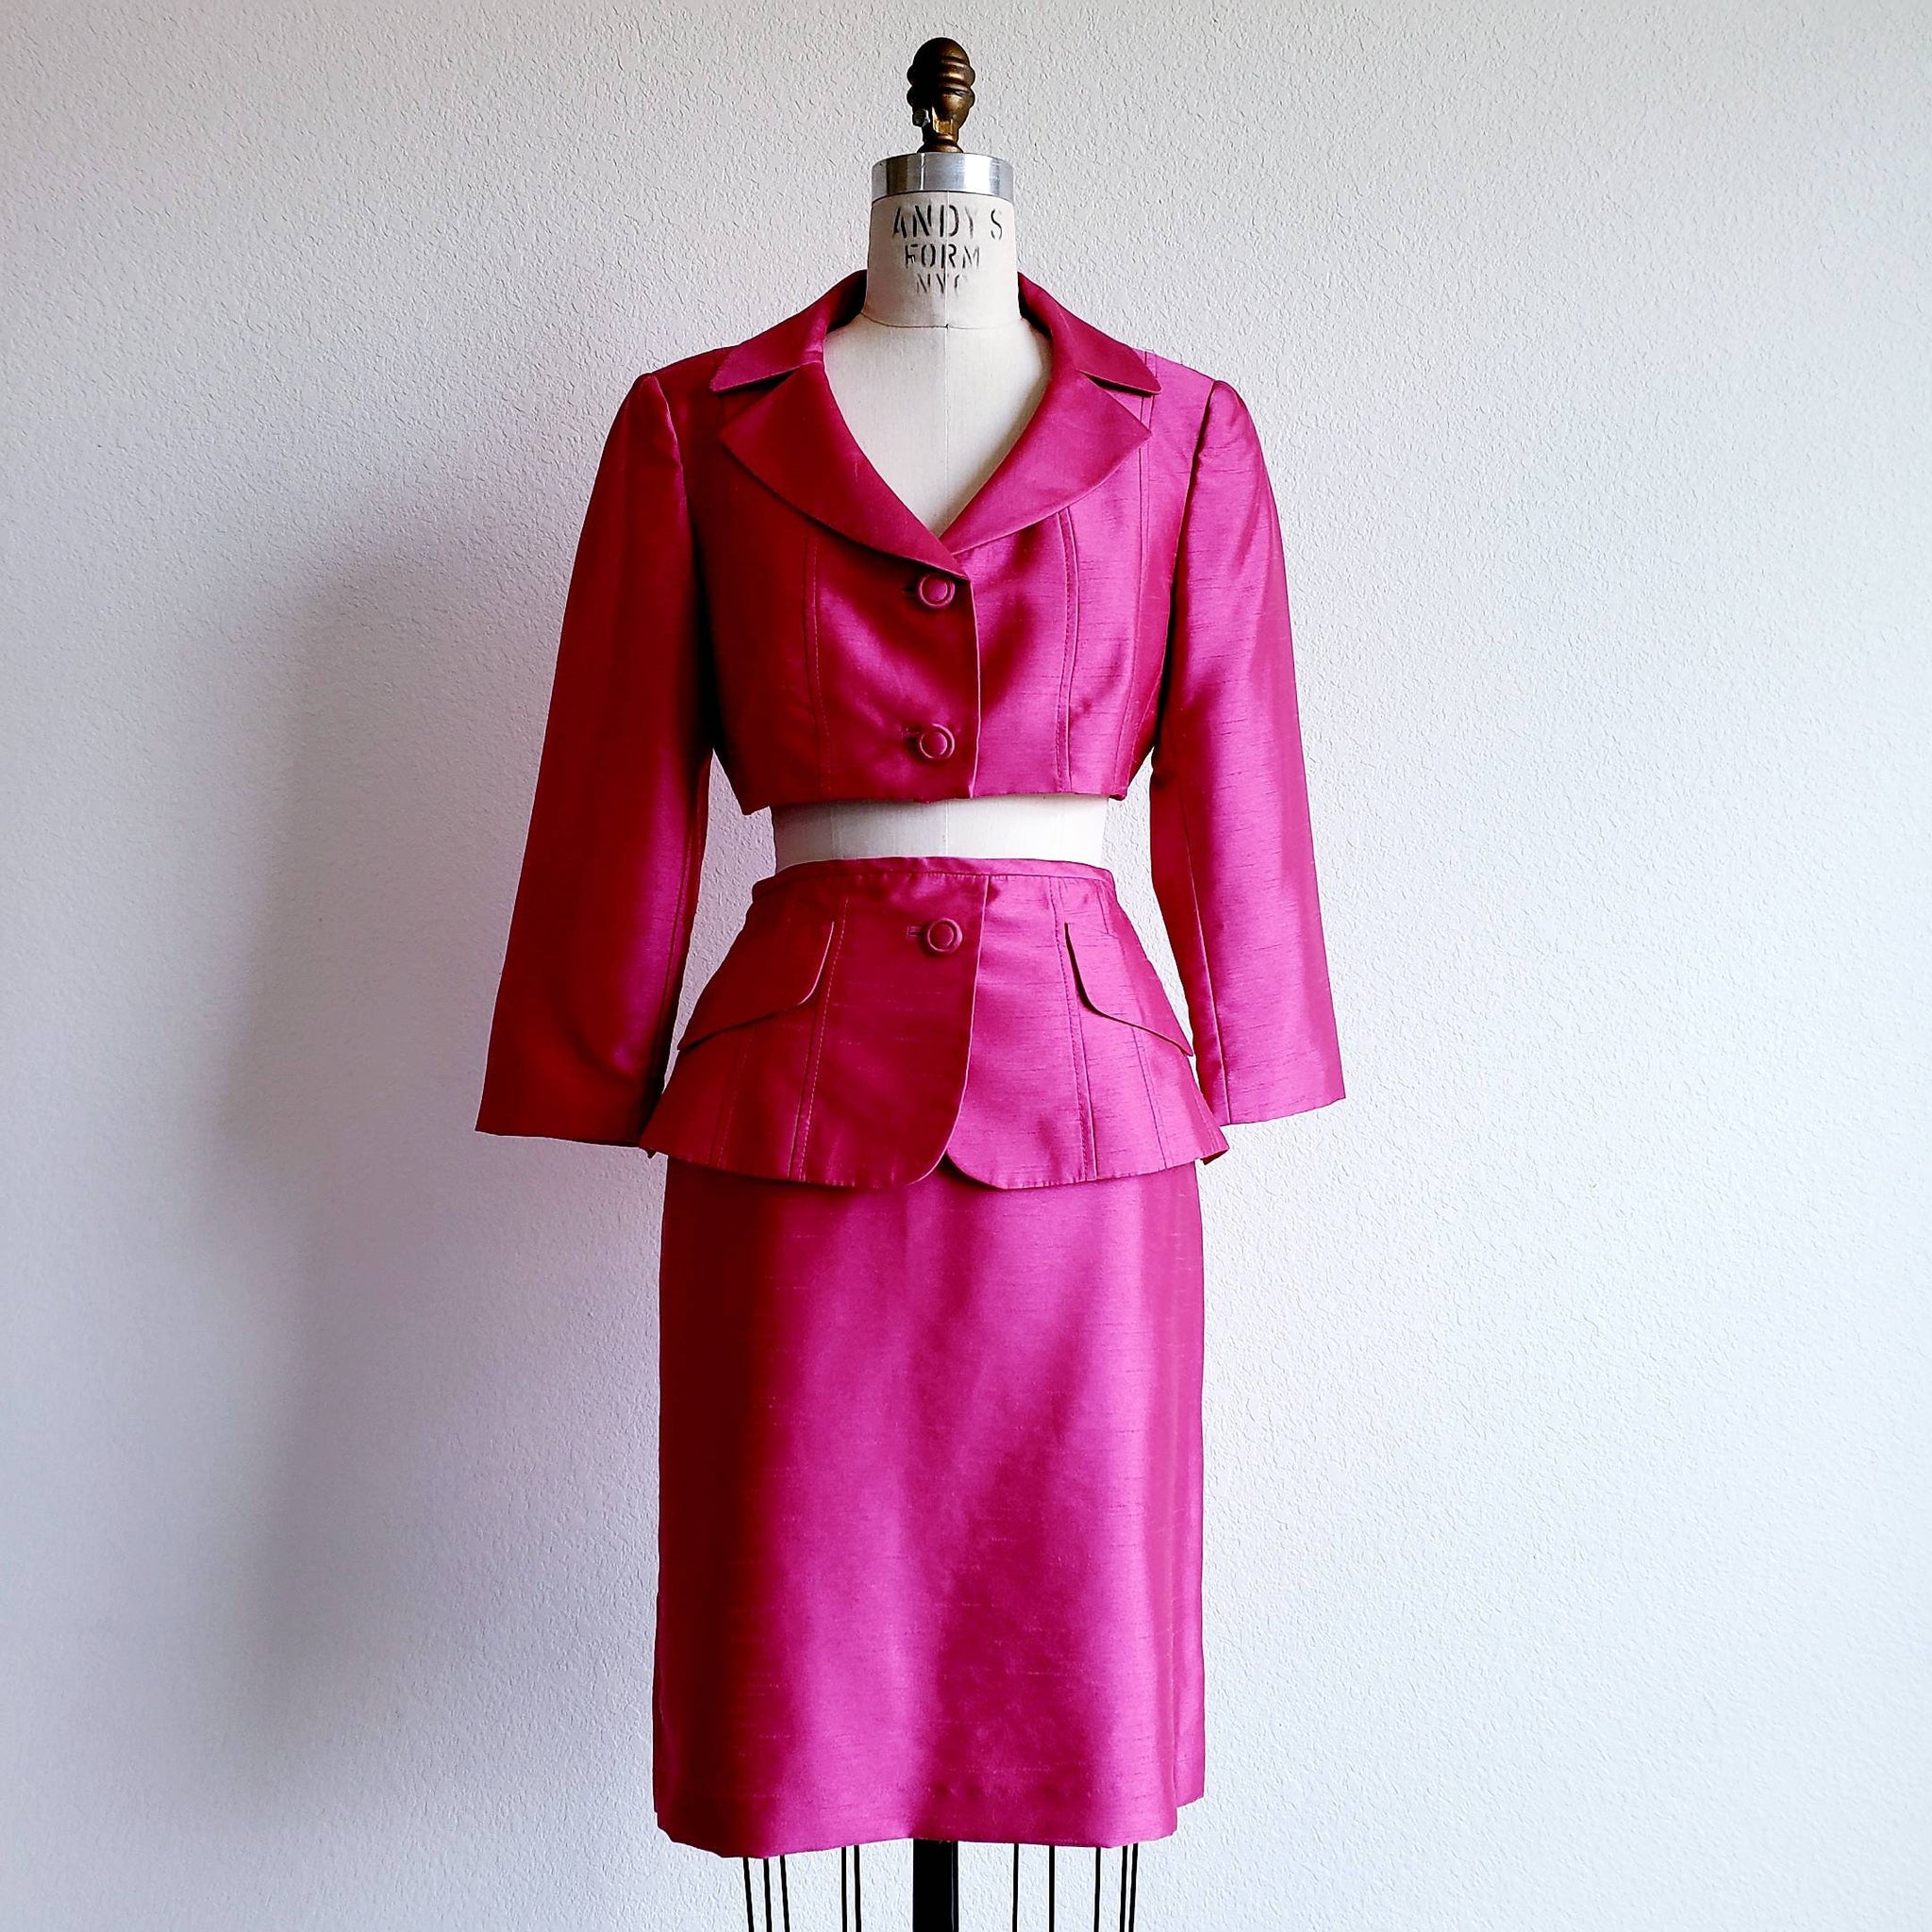 Vintage Upcycled Tahari Pink Fuschia Suit With Cropped Jacket and Peplum Skirt - ChicCityVintage